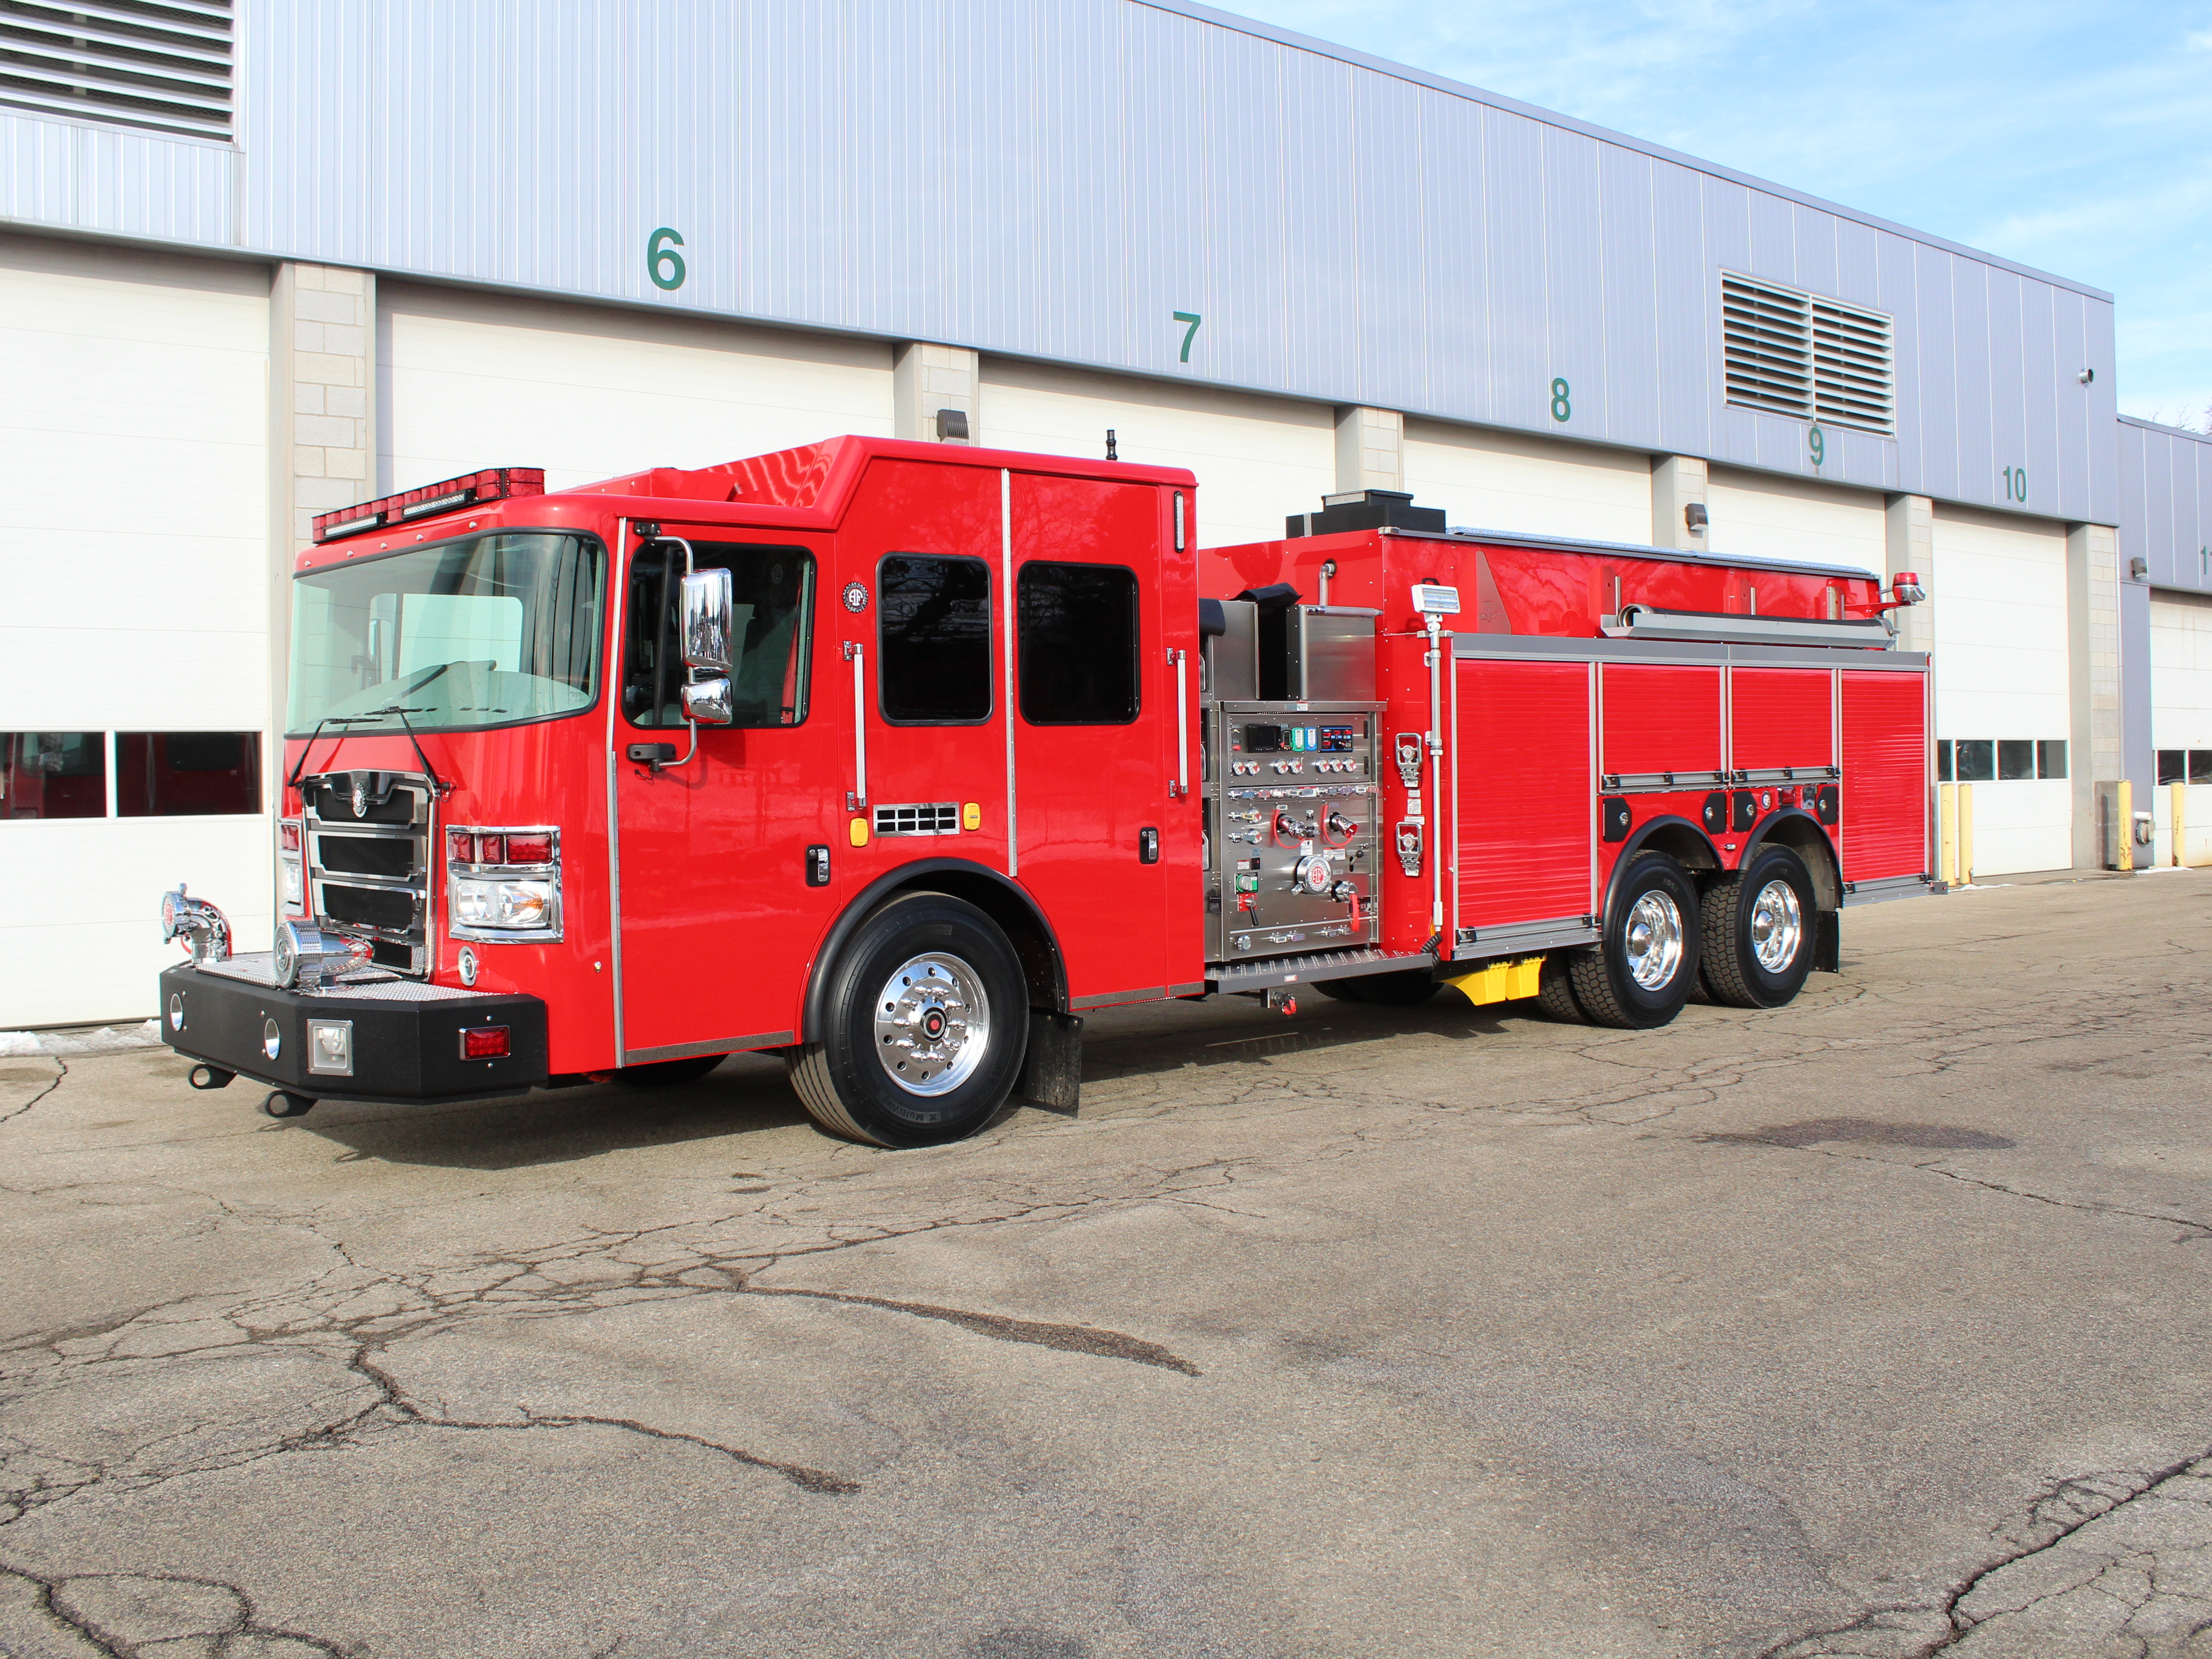 Union Township Fire Dept., IN – #23509